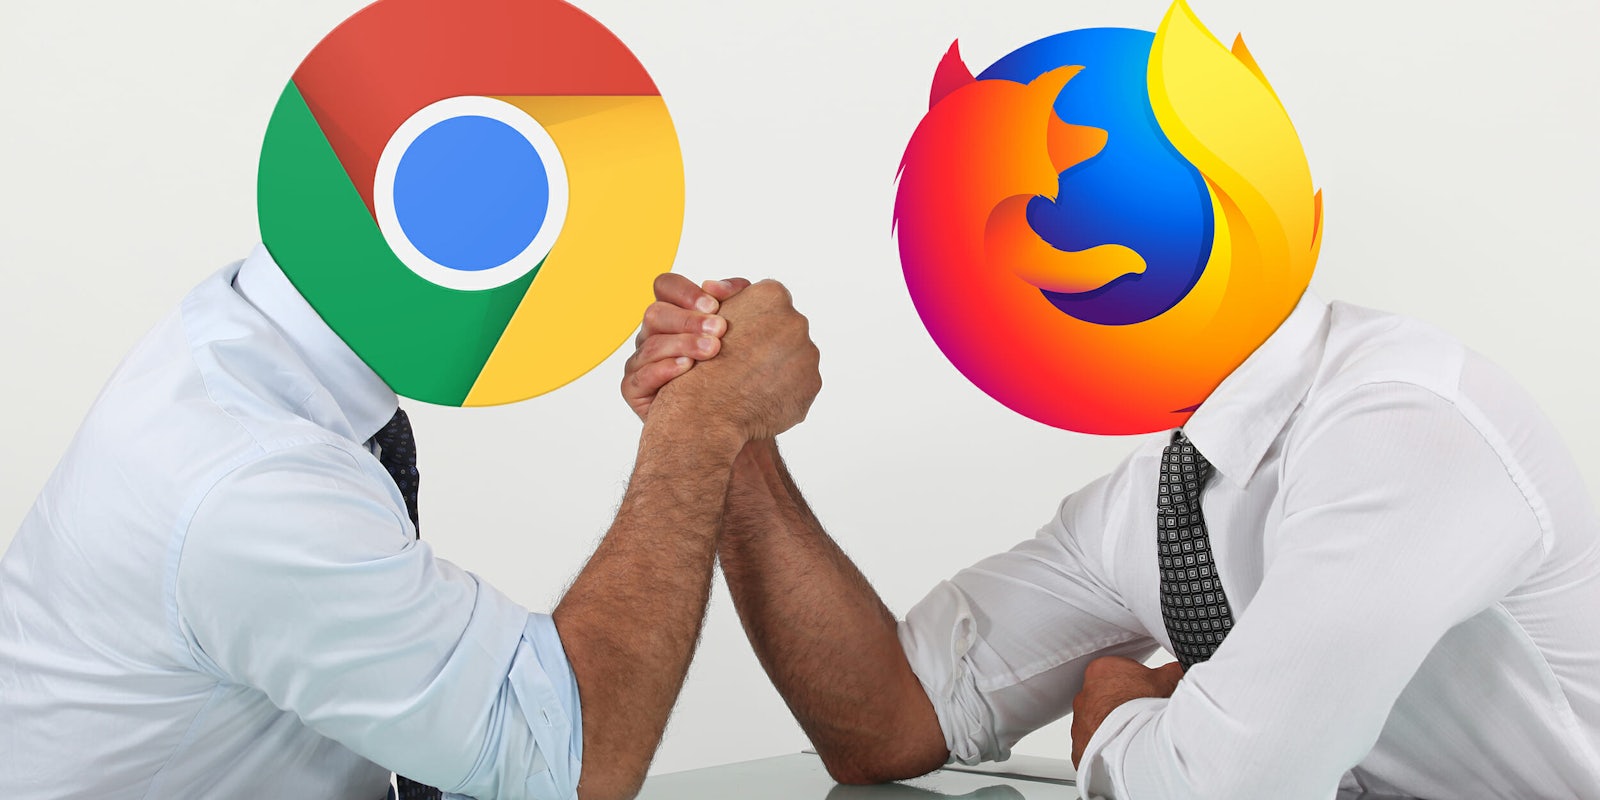 man in suit with Chrome logo head and man in suit with Mozilla logo head arm-wrestling